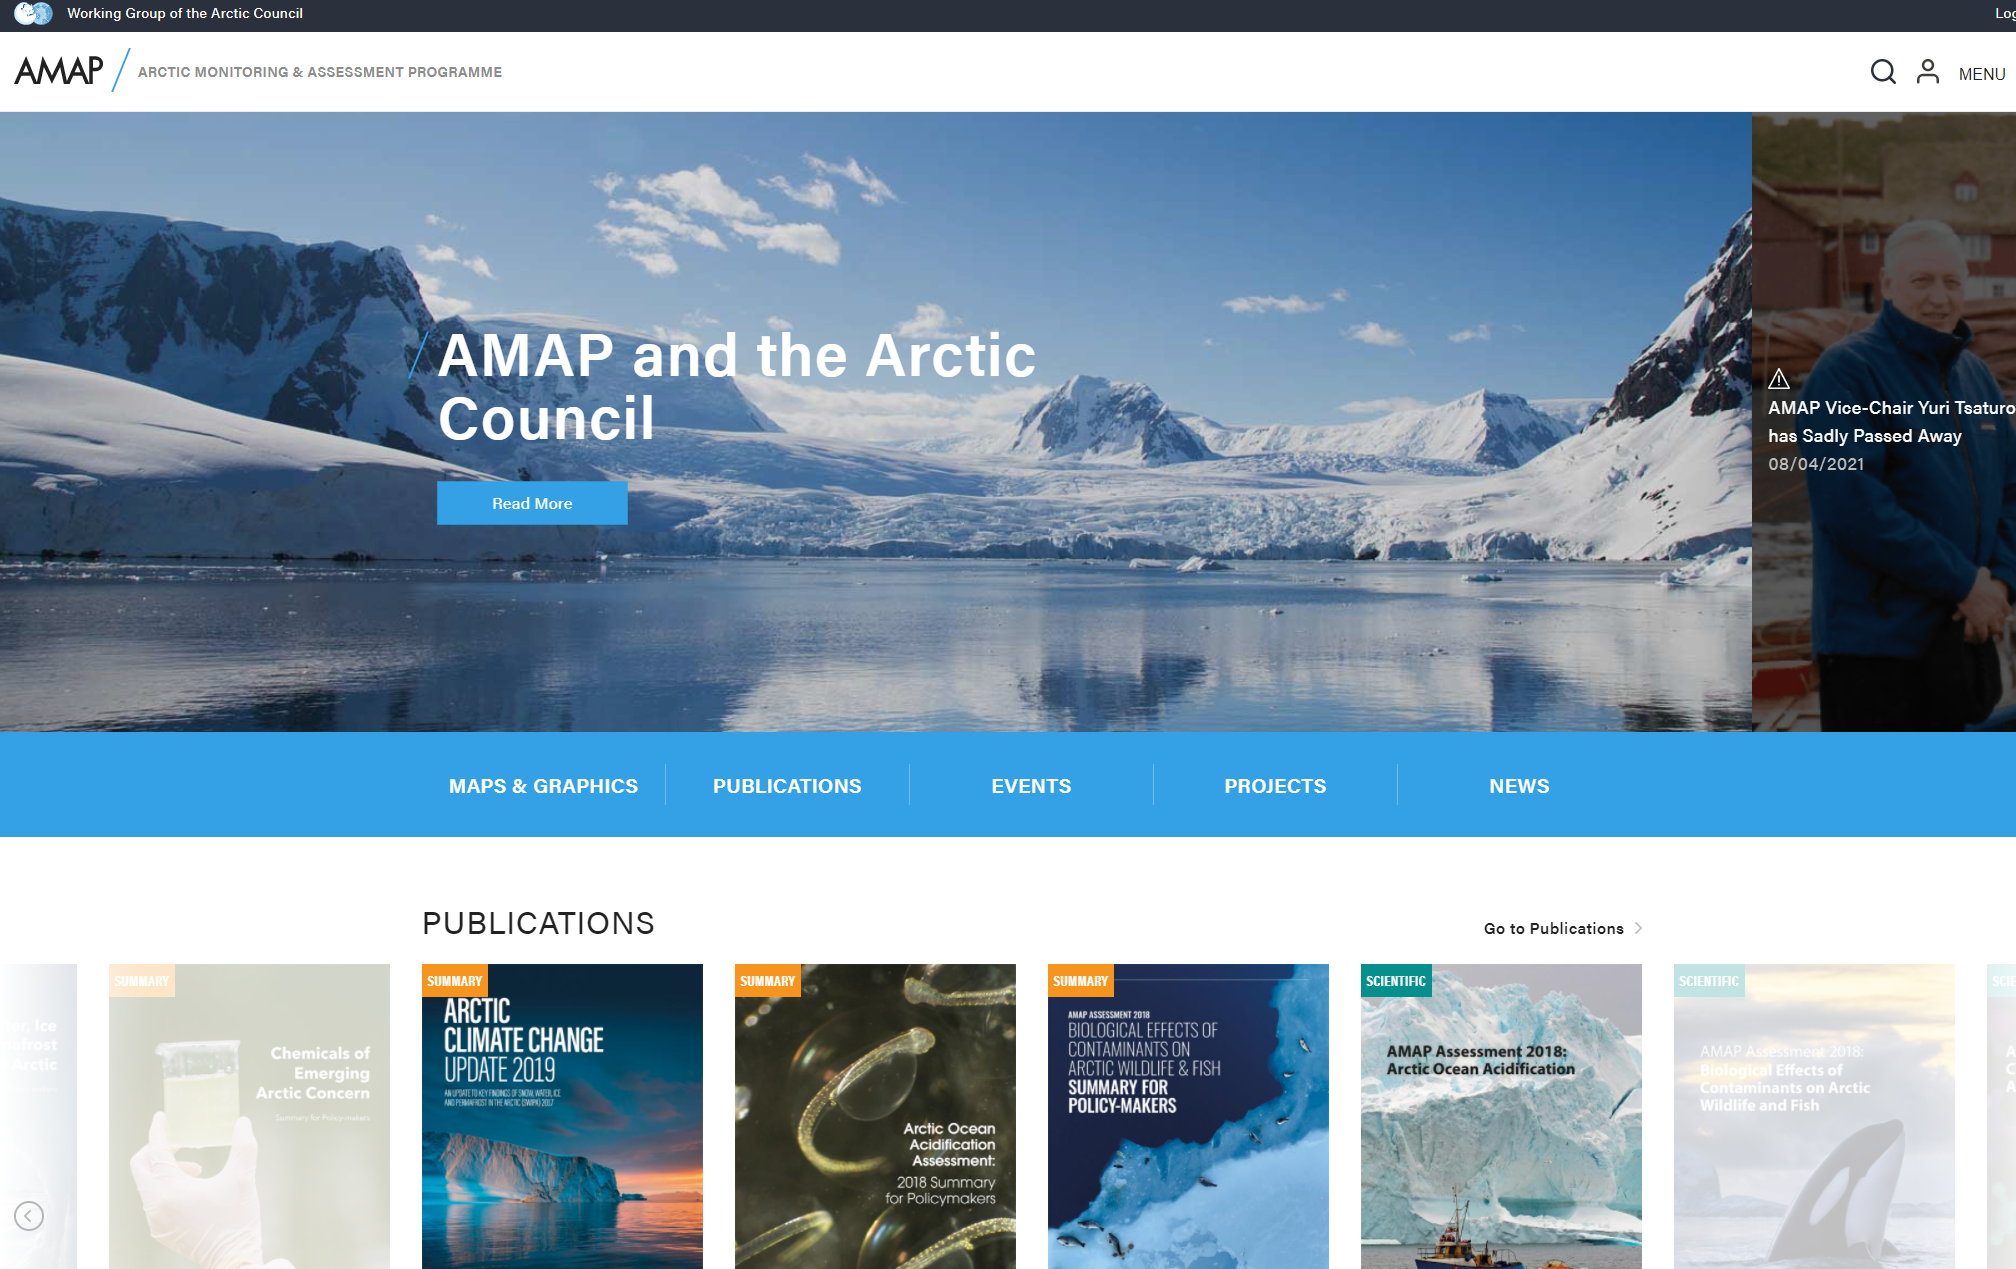 The State of the Arctic: New findings from AMAP on Climate, Pollution and Human Health support urgent need for action